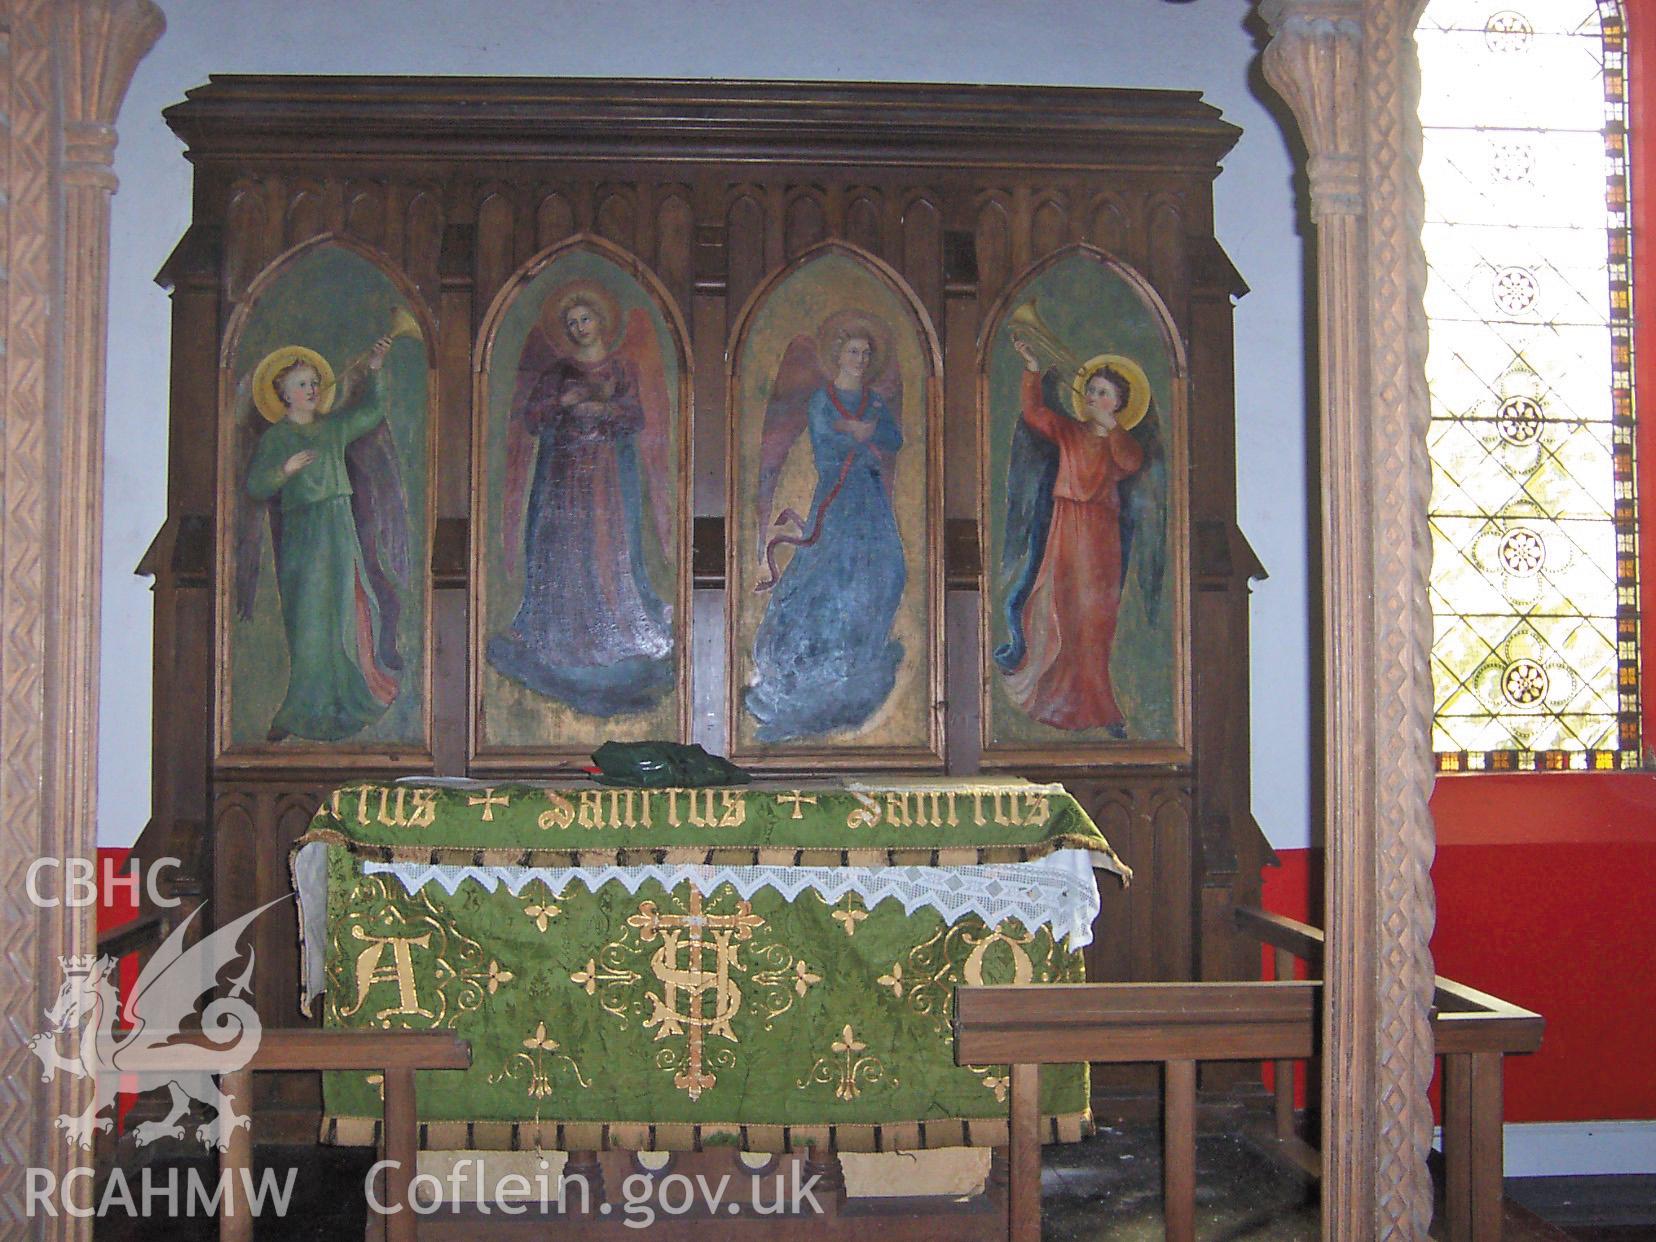 Colour digital photograph showing a close up of the church altar.